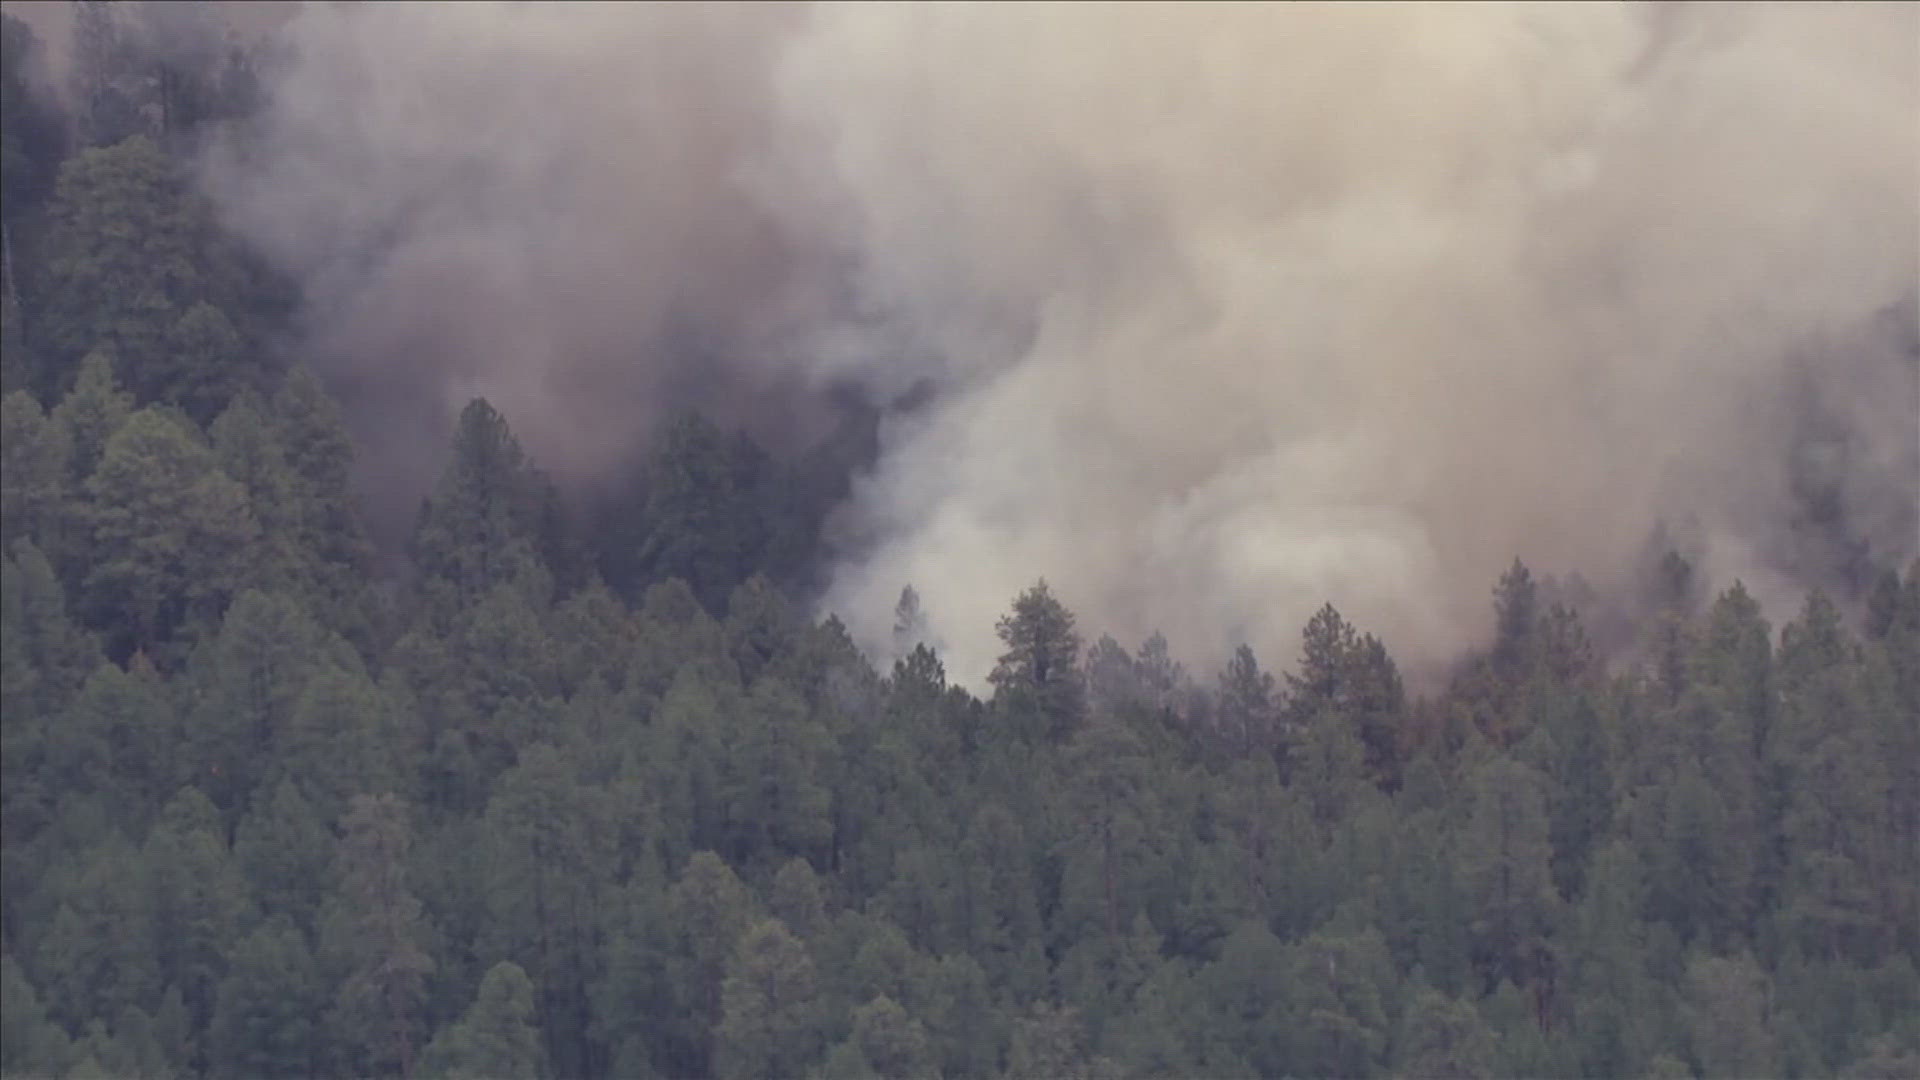 The fire was discovered 20 miles northeast of Payson Monday.